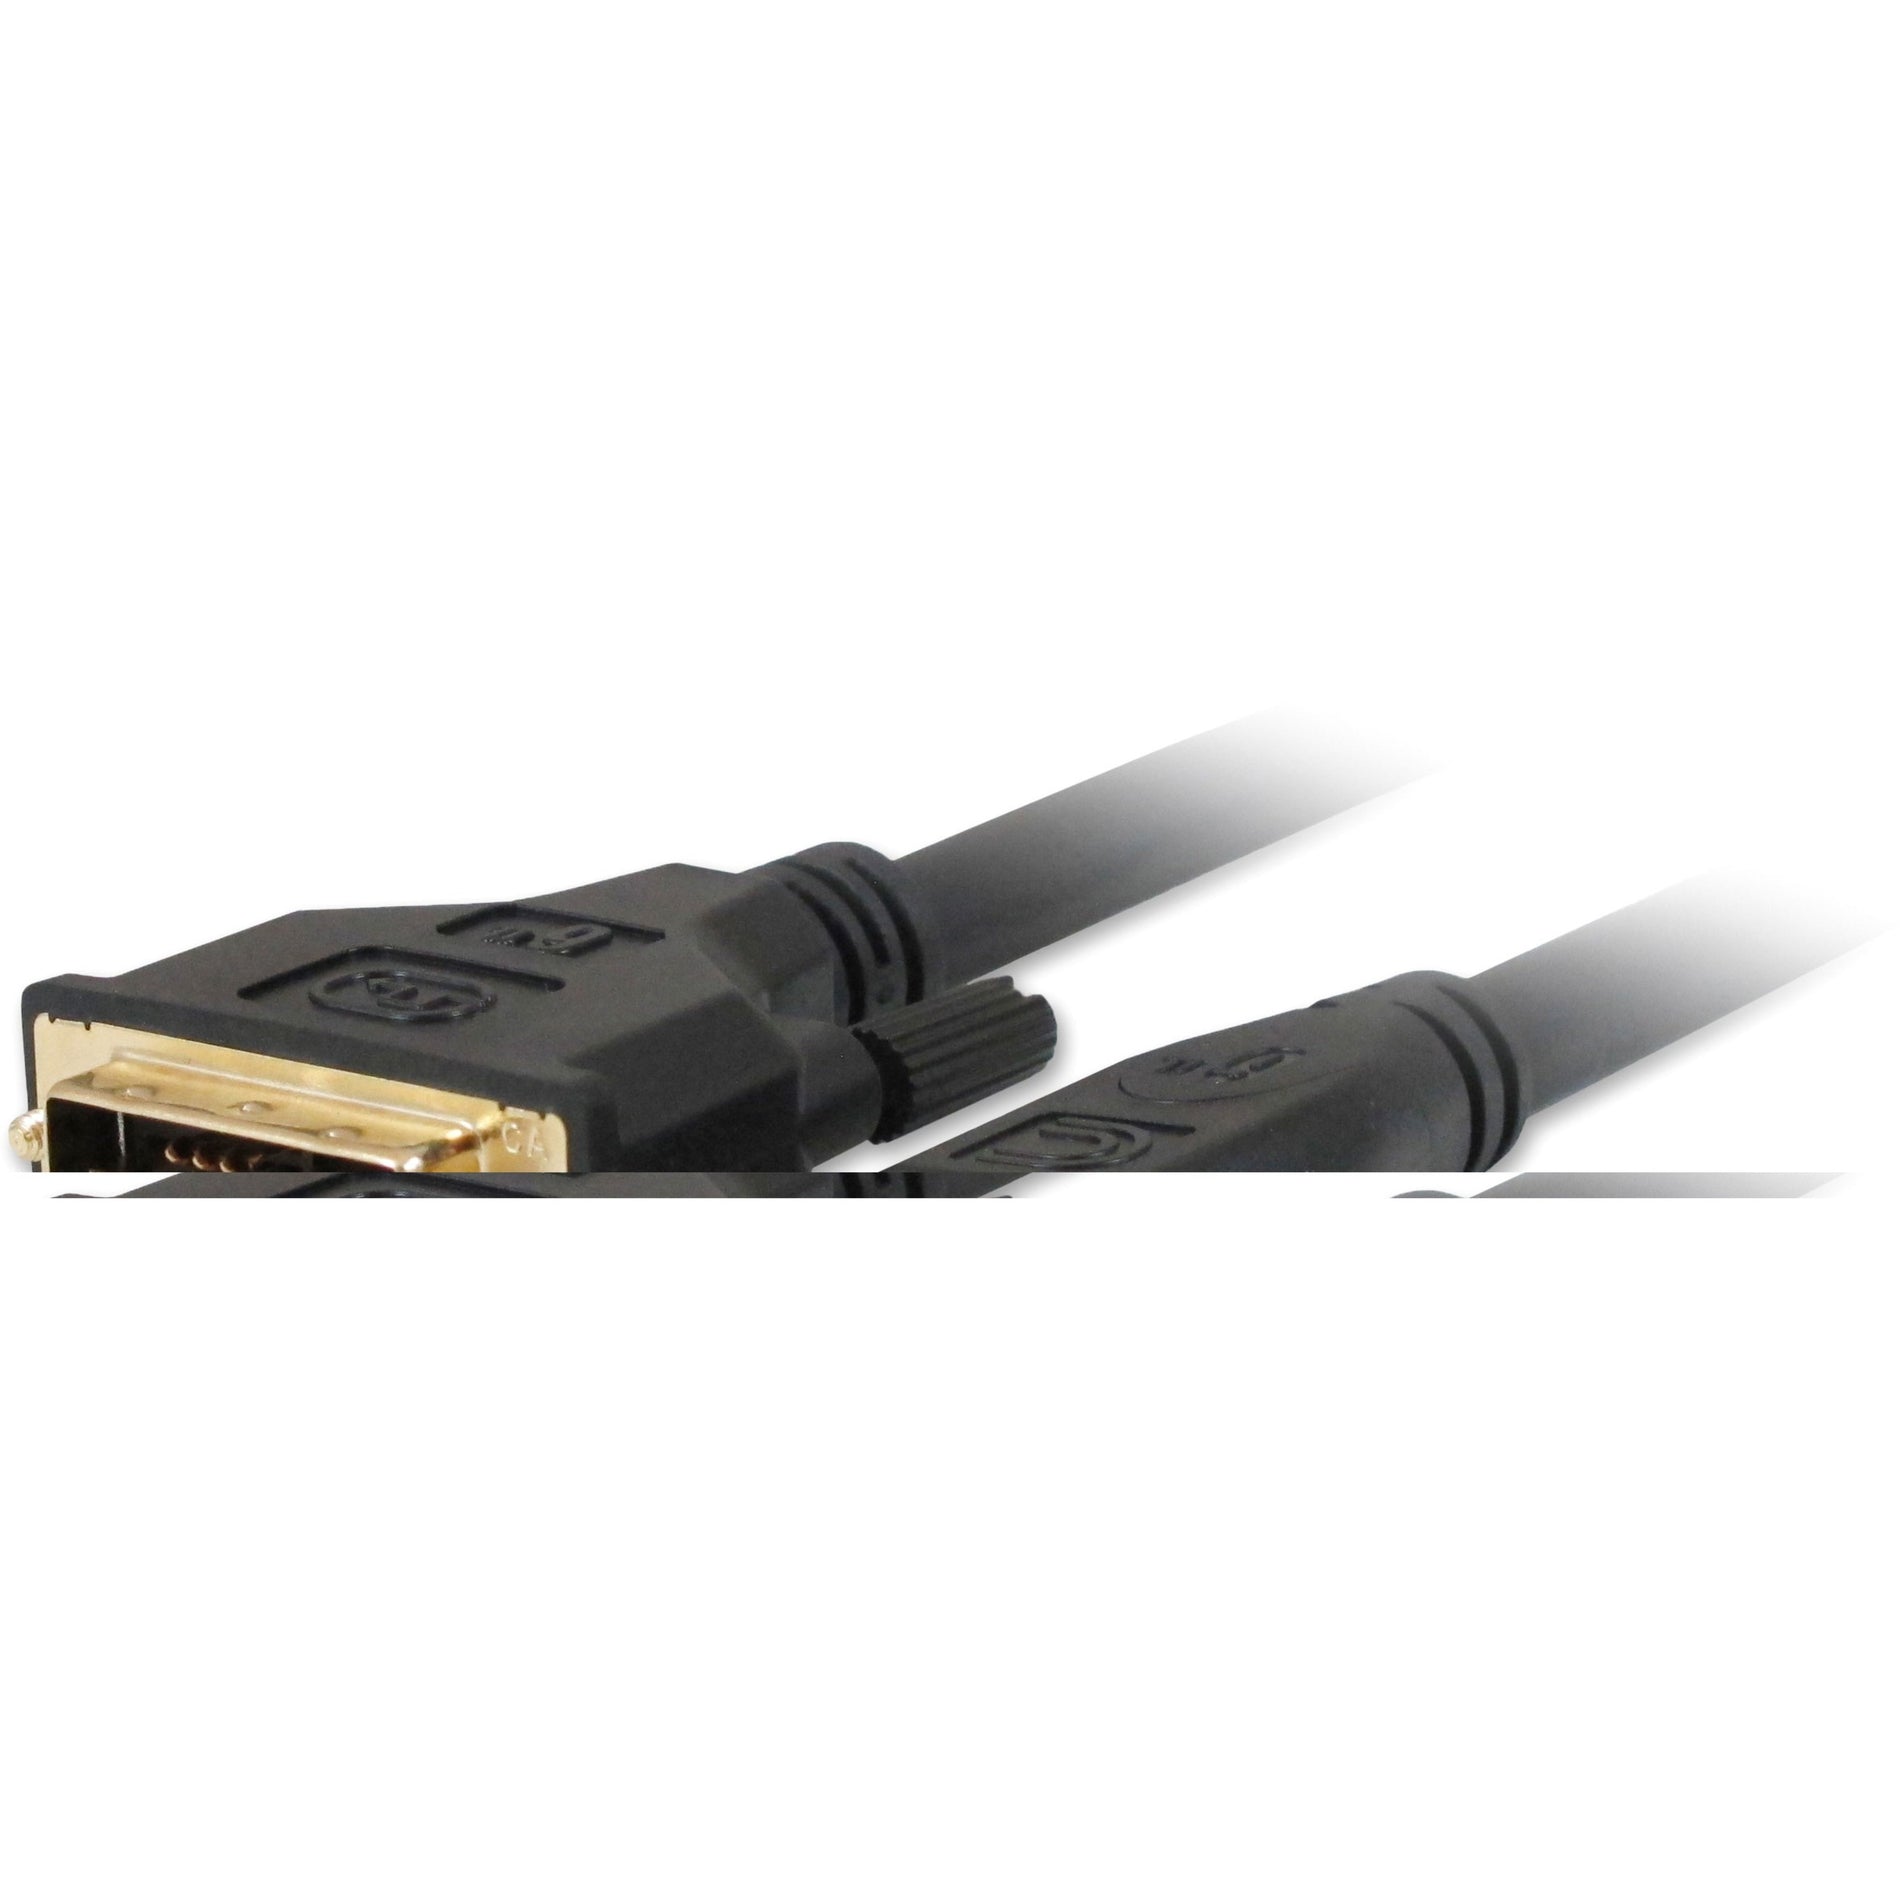 Comprehensive HD-DVI-3PROBLK Pro AV/IT Series HDMI to DVI 26 AWG Cable 3ft, Lifetime Warranty, Strain Relief, HDCP, EMI/RF Protection